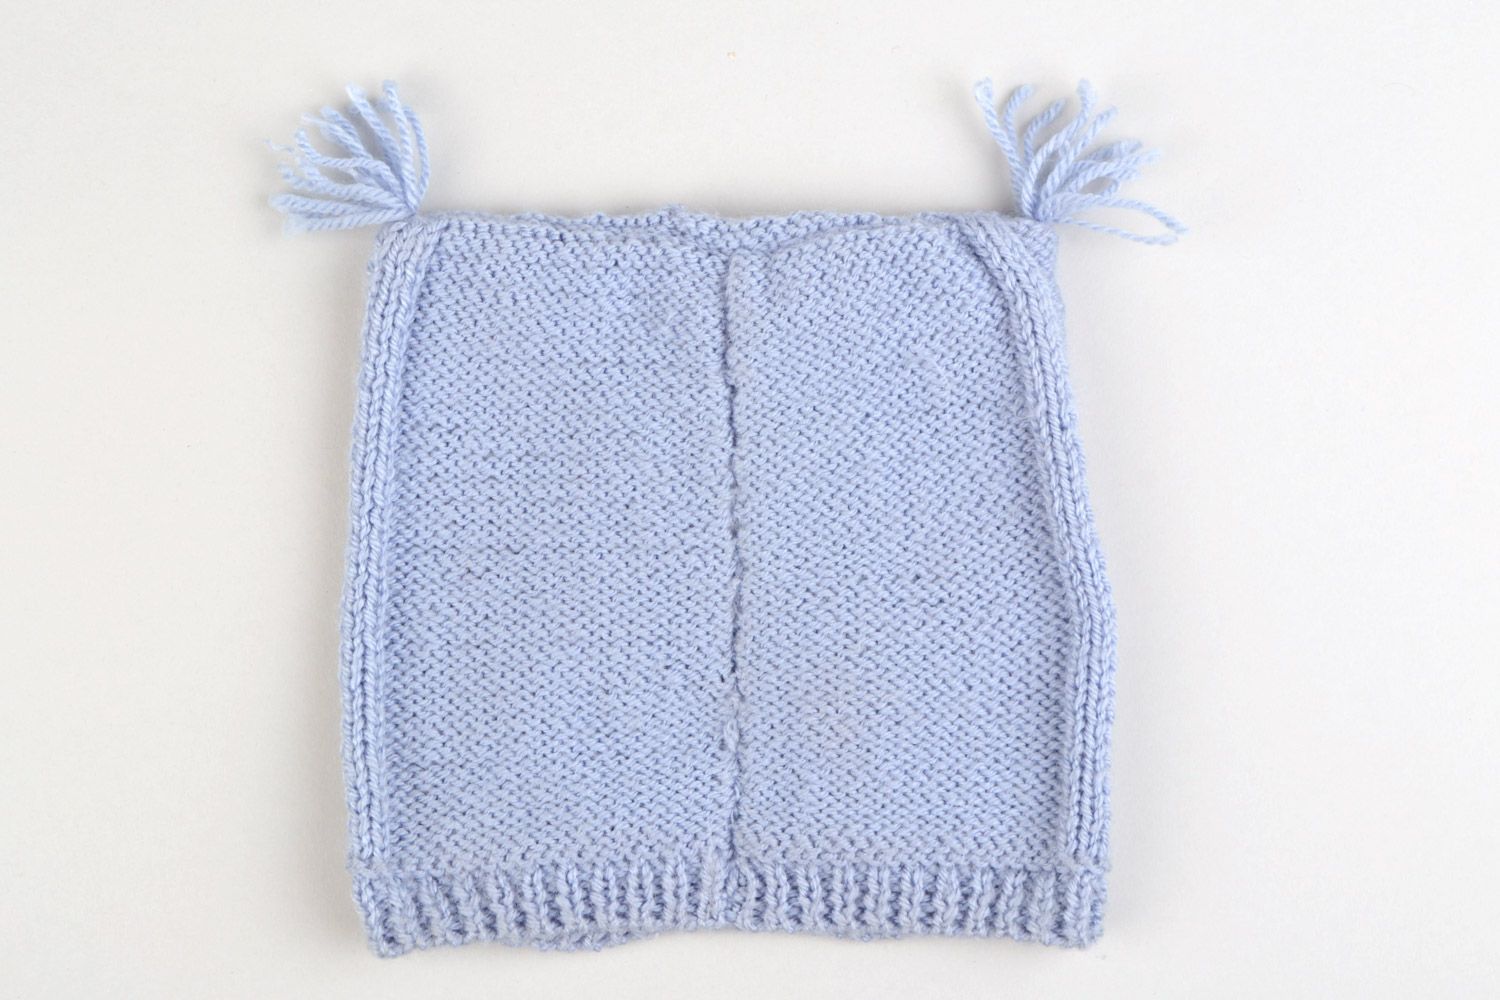 Rectangular handmade blue knitted hat for baby with owl pattern made of acrylic yarns photo 4